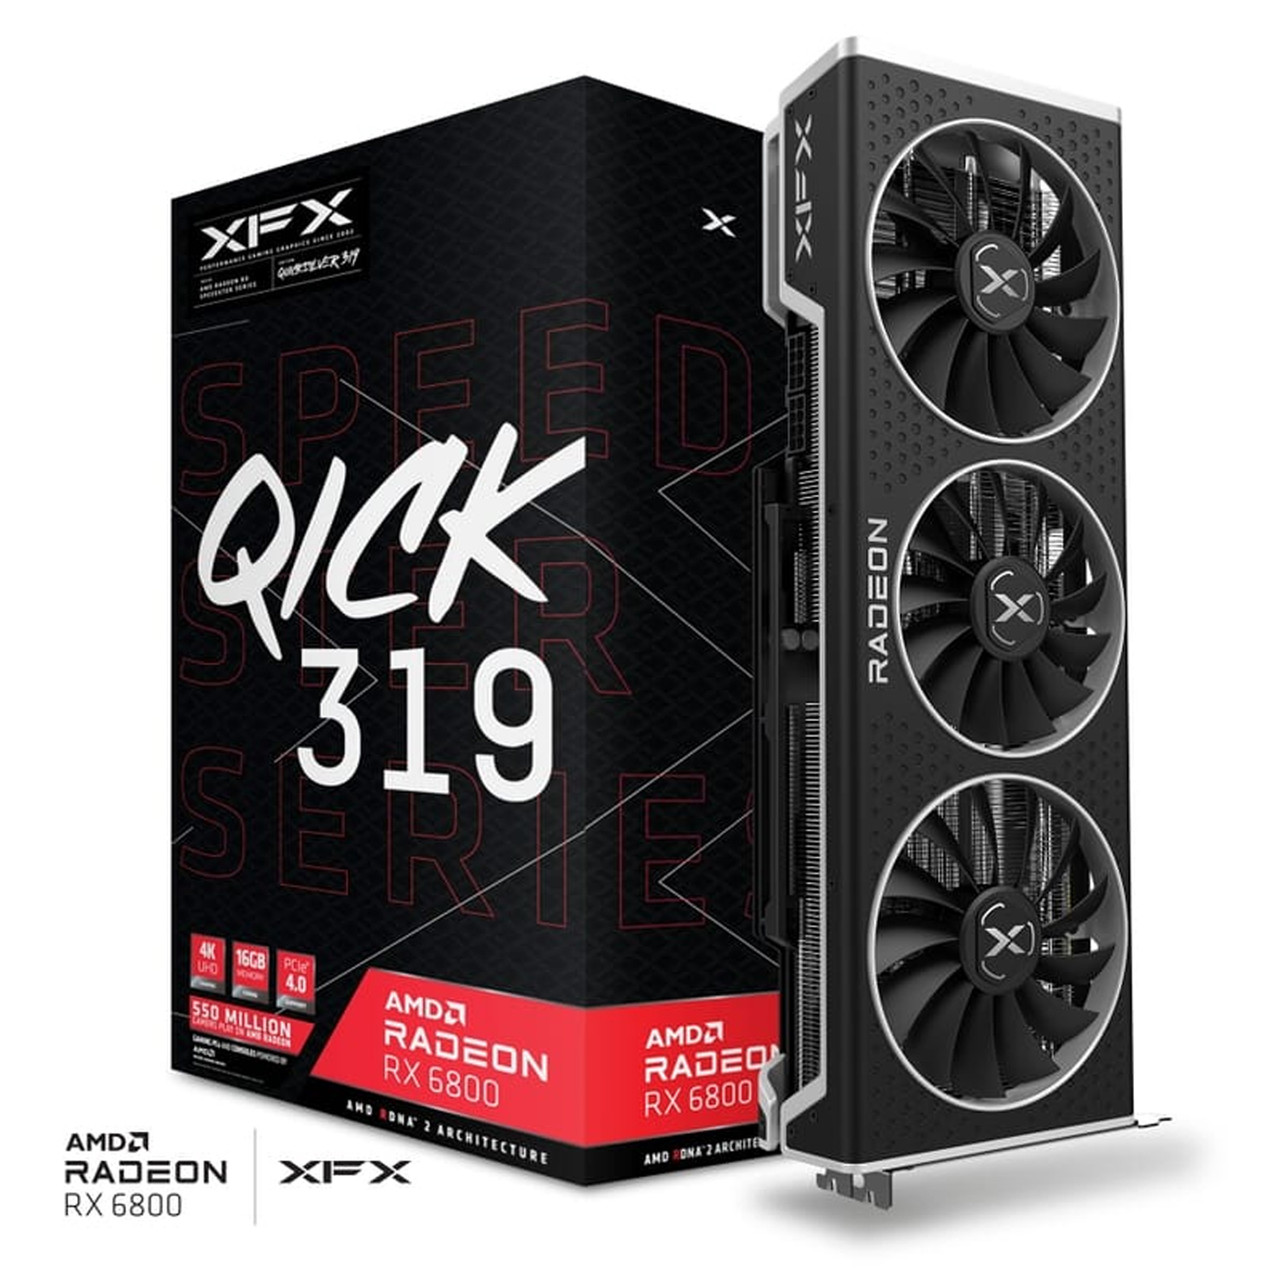 XFX RX-68XLALBD9 Speedster QICK 319 AMD Radeon™ RX 6800 BLACK Gaming Graphics Card with 16GB GDDR6, AMD RDNA™ 2 (Limited supply, All sales are final)